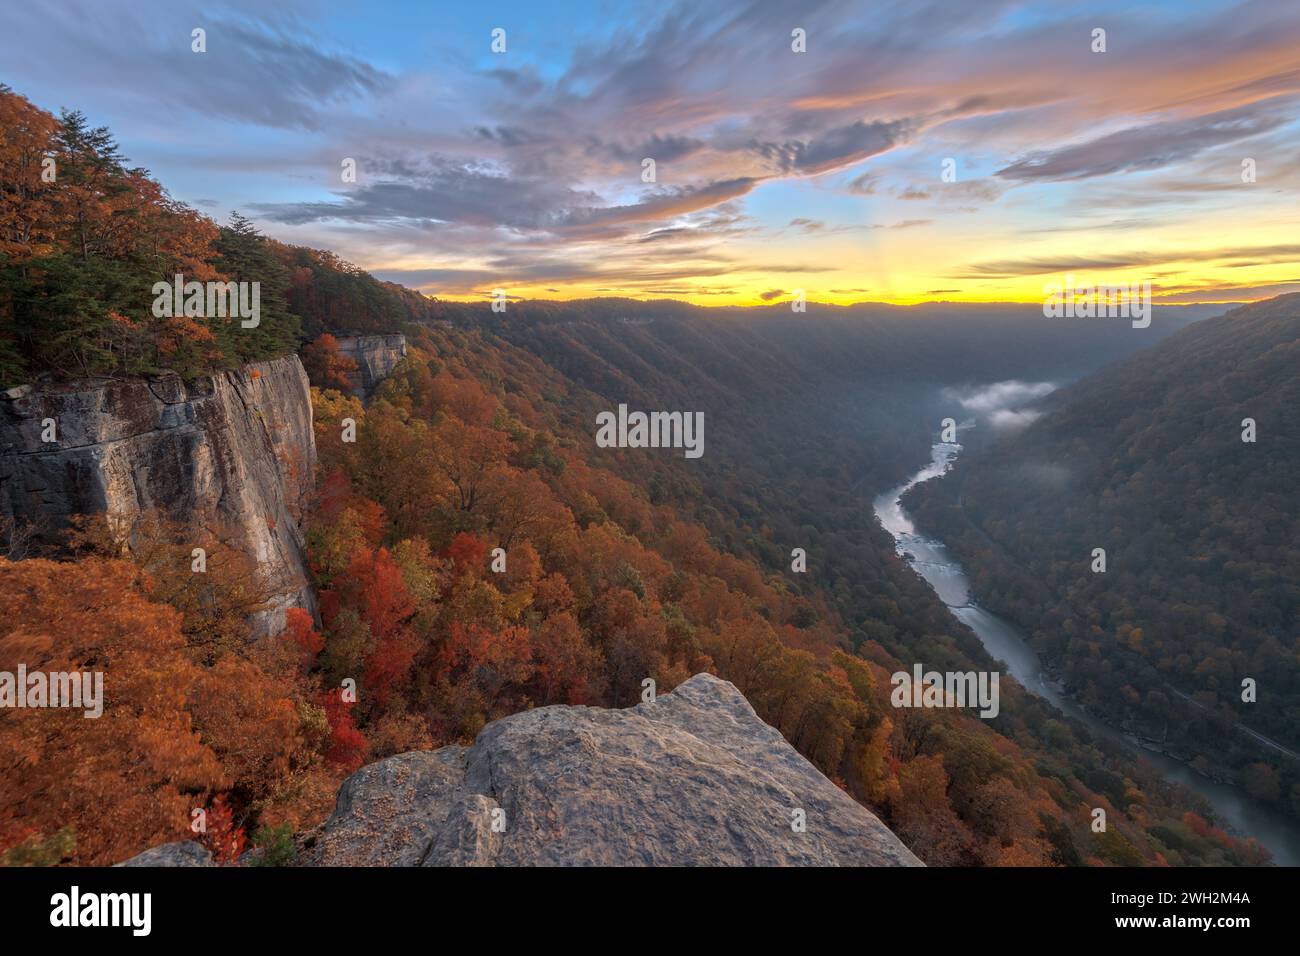 New River Gorge, West Virginia, USA autumn morning landscape at the Endless Wall. Stock Photo